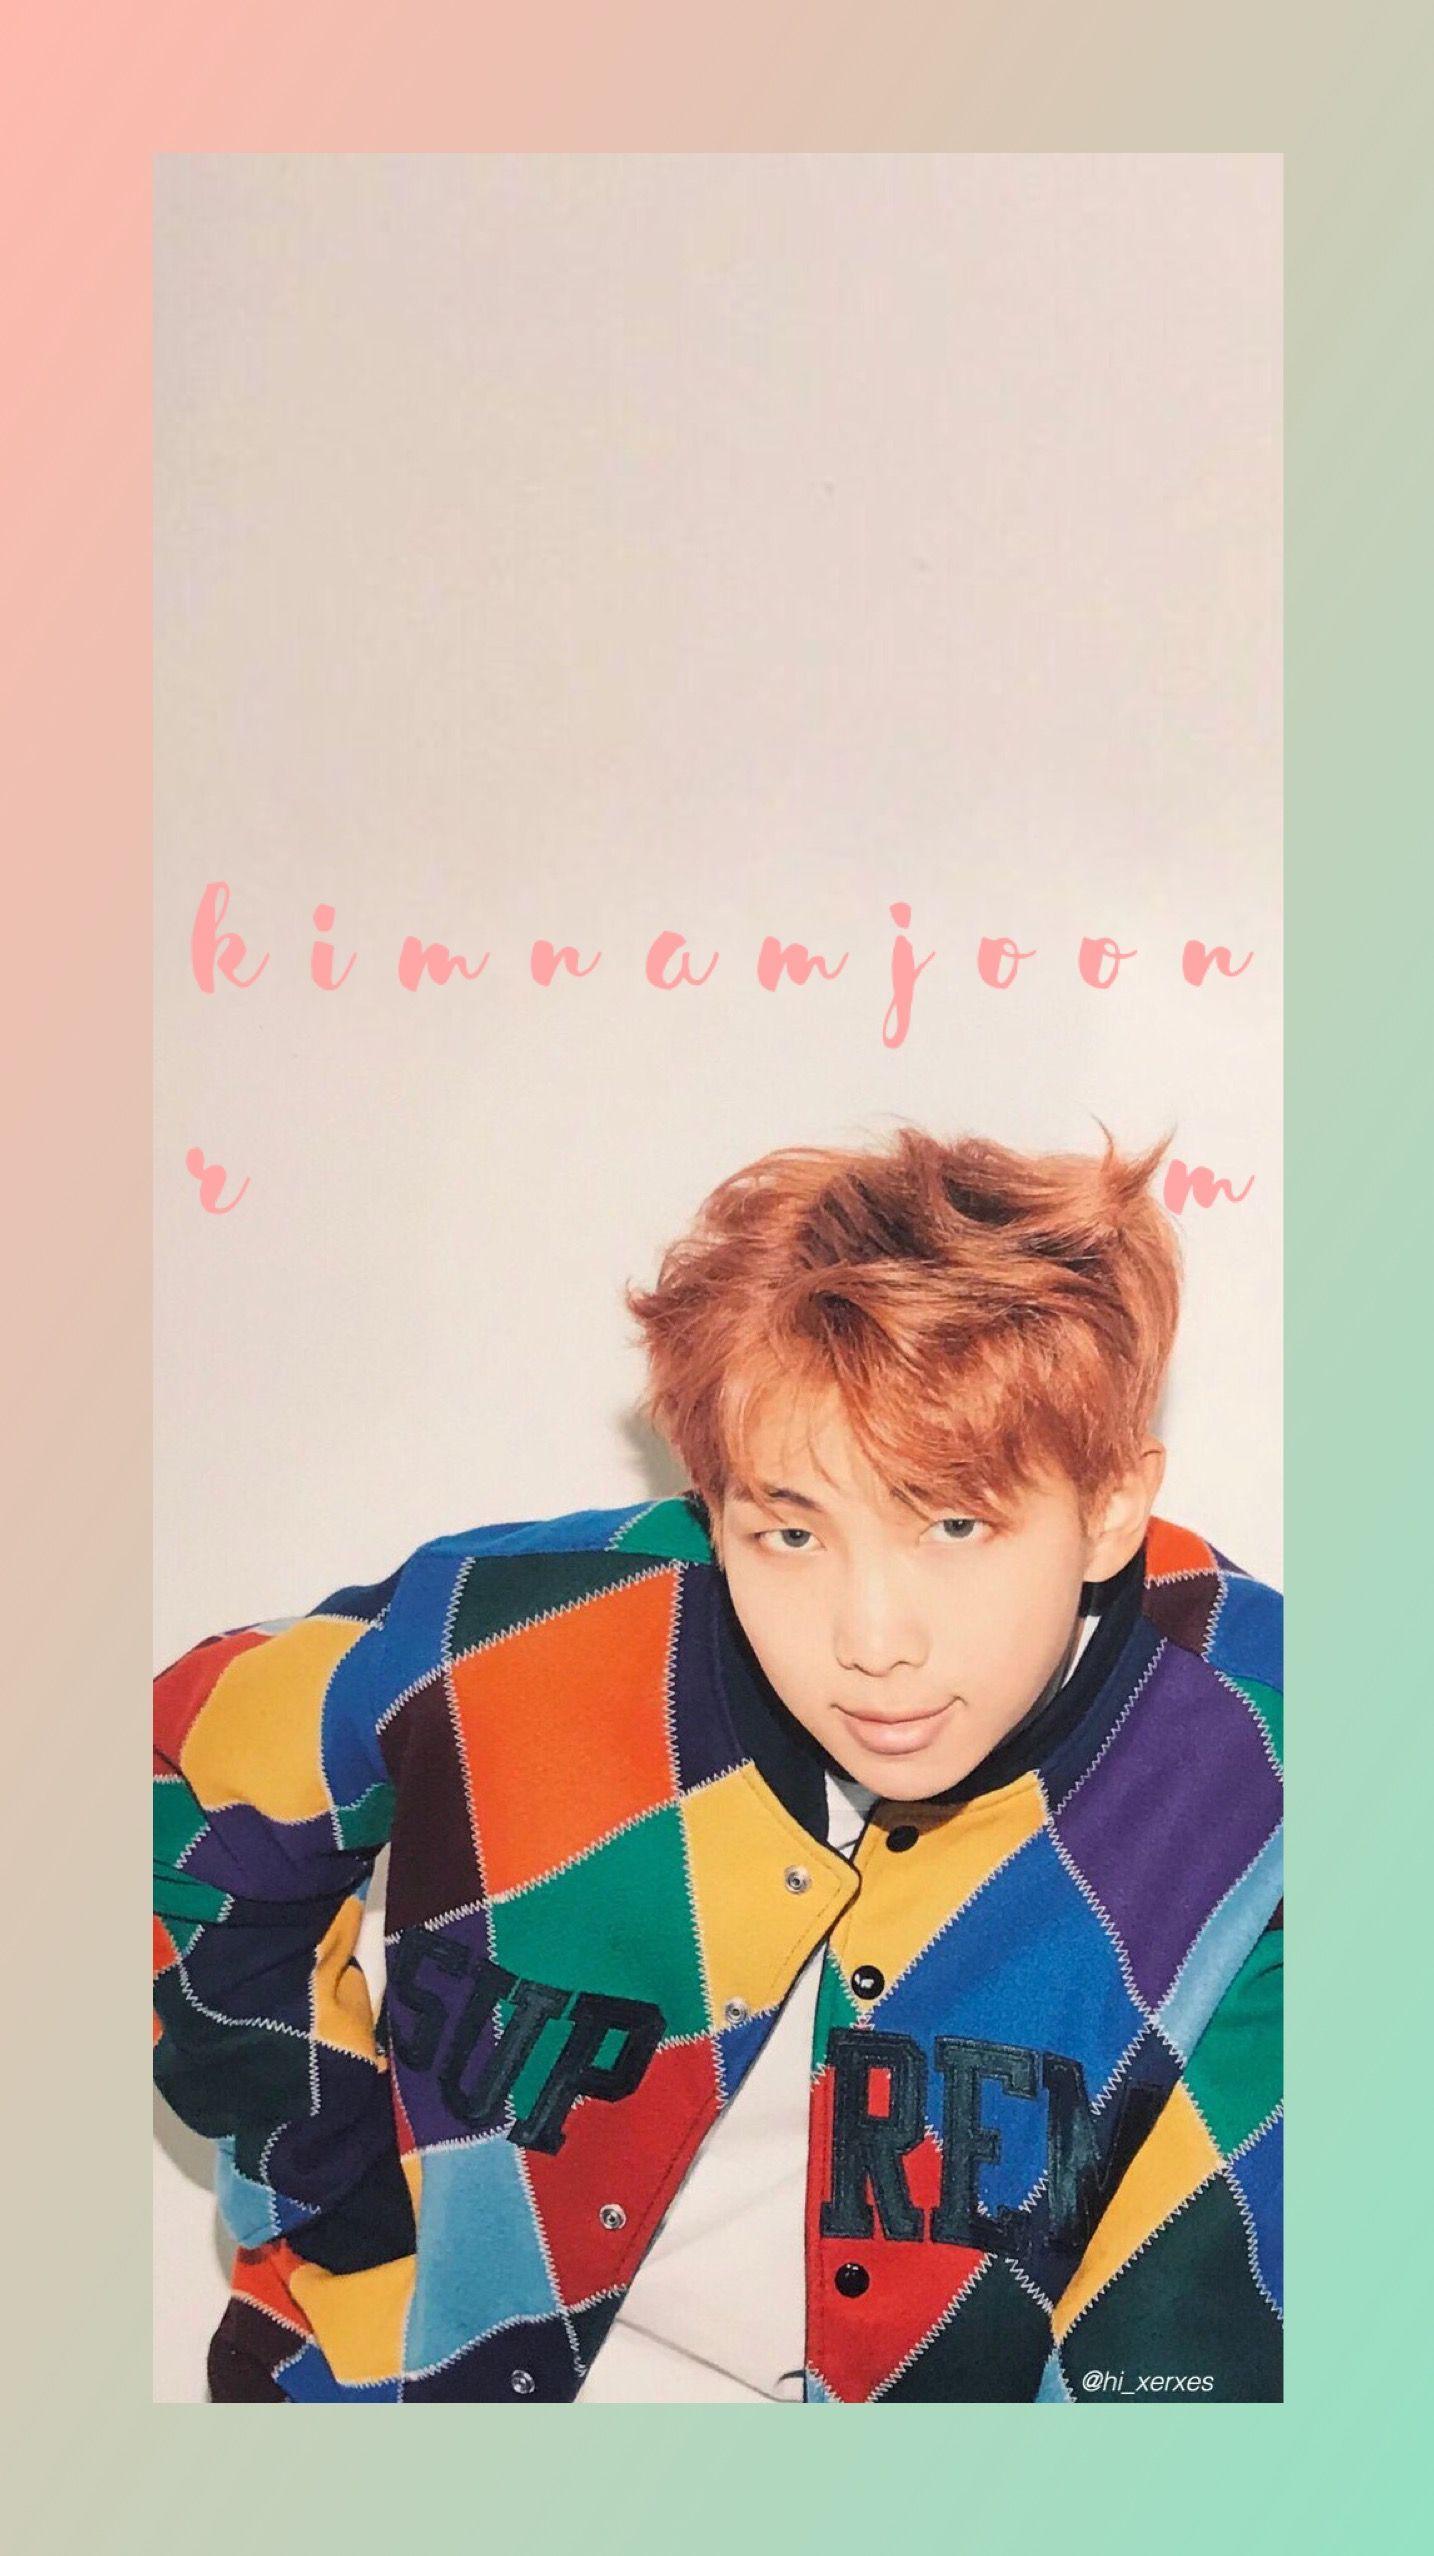  RM  BTS  Wallpapers  Top Free RM  BTS  Backgrounds  